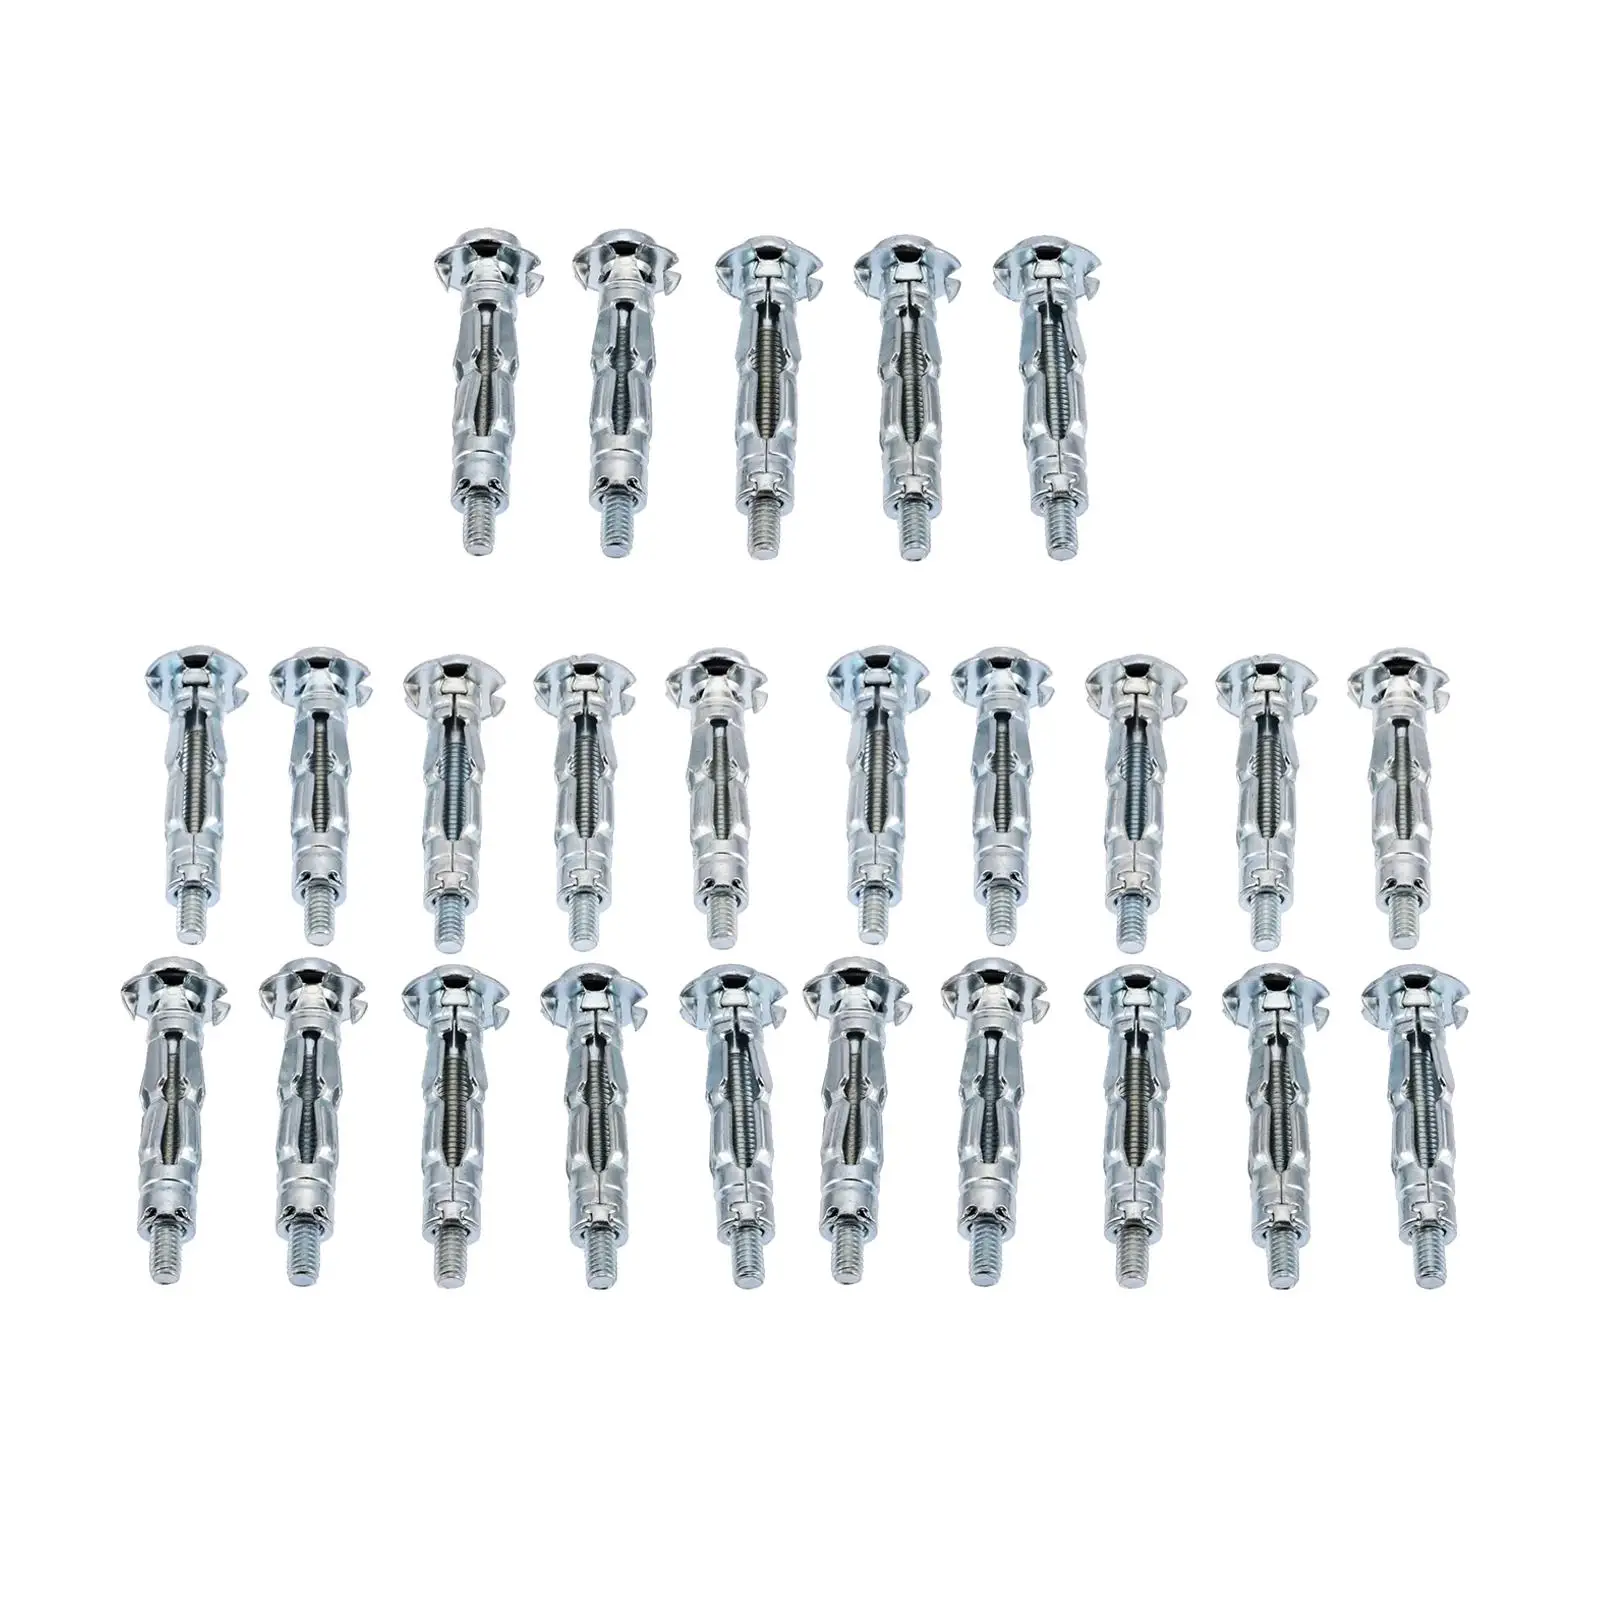 25Pcs Hollow Wall Anchors Metal Plasterboard Cavity Wall Fixings Anchors Plugs Hollow Wall Drive Anchor Screws for Tile